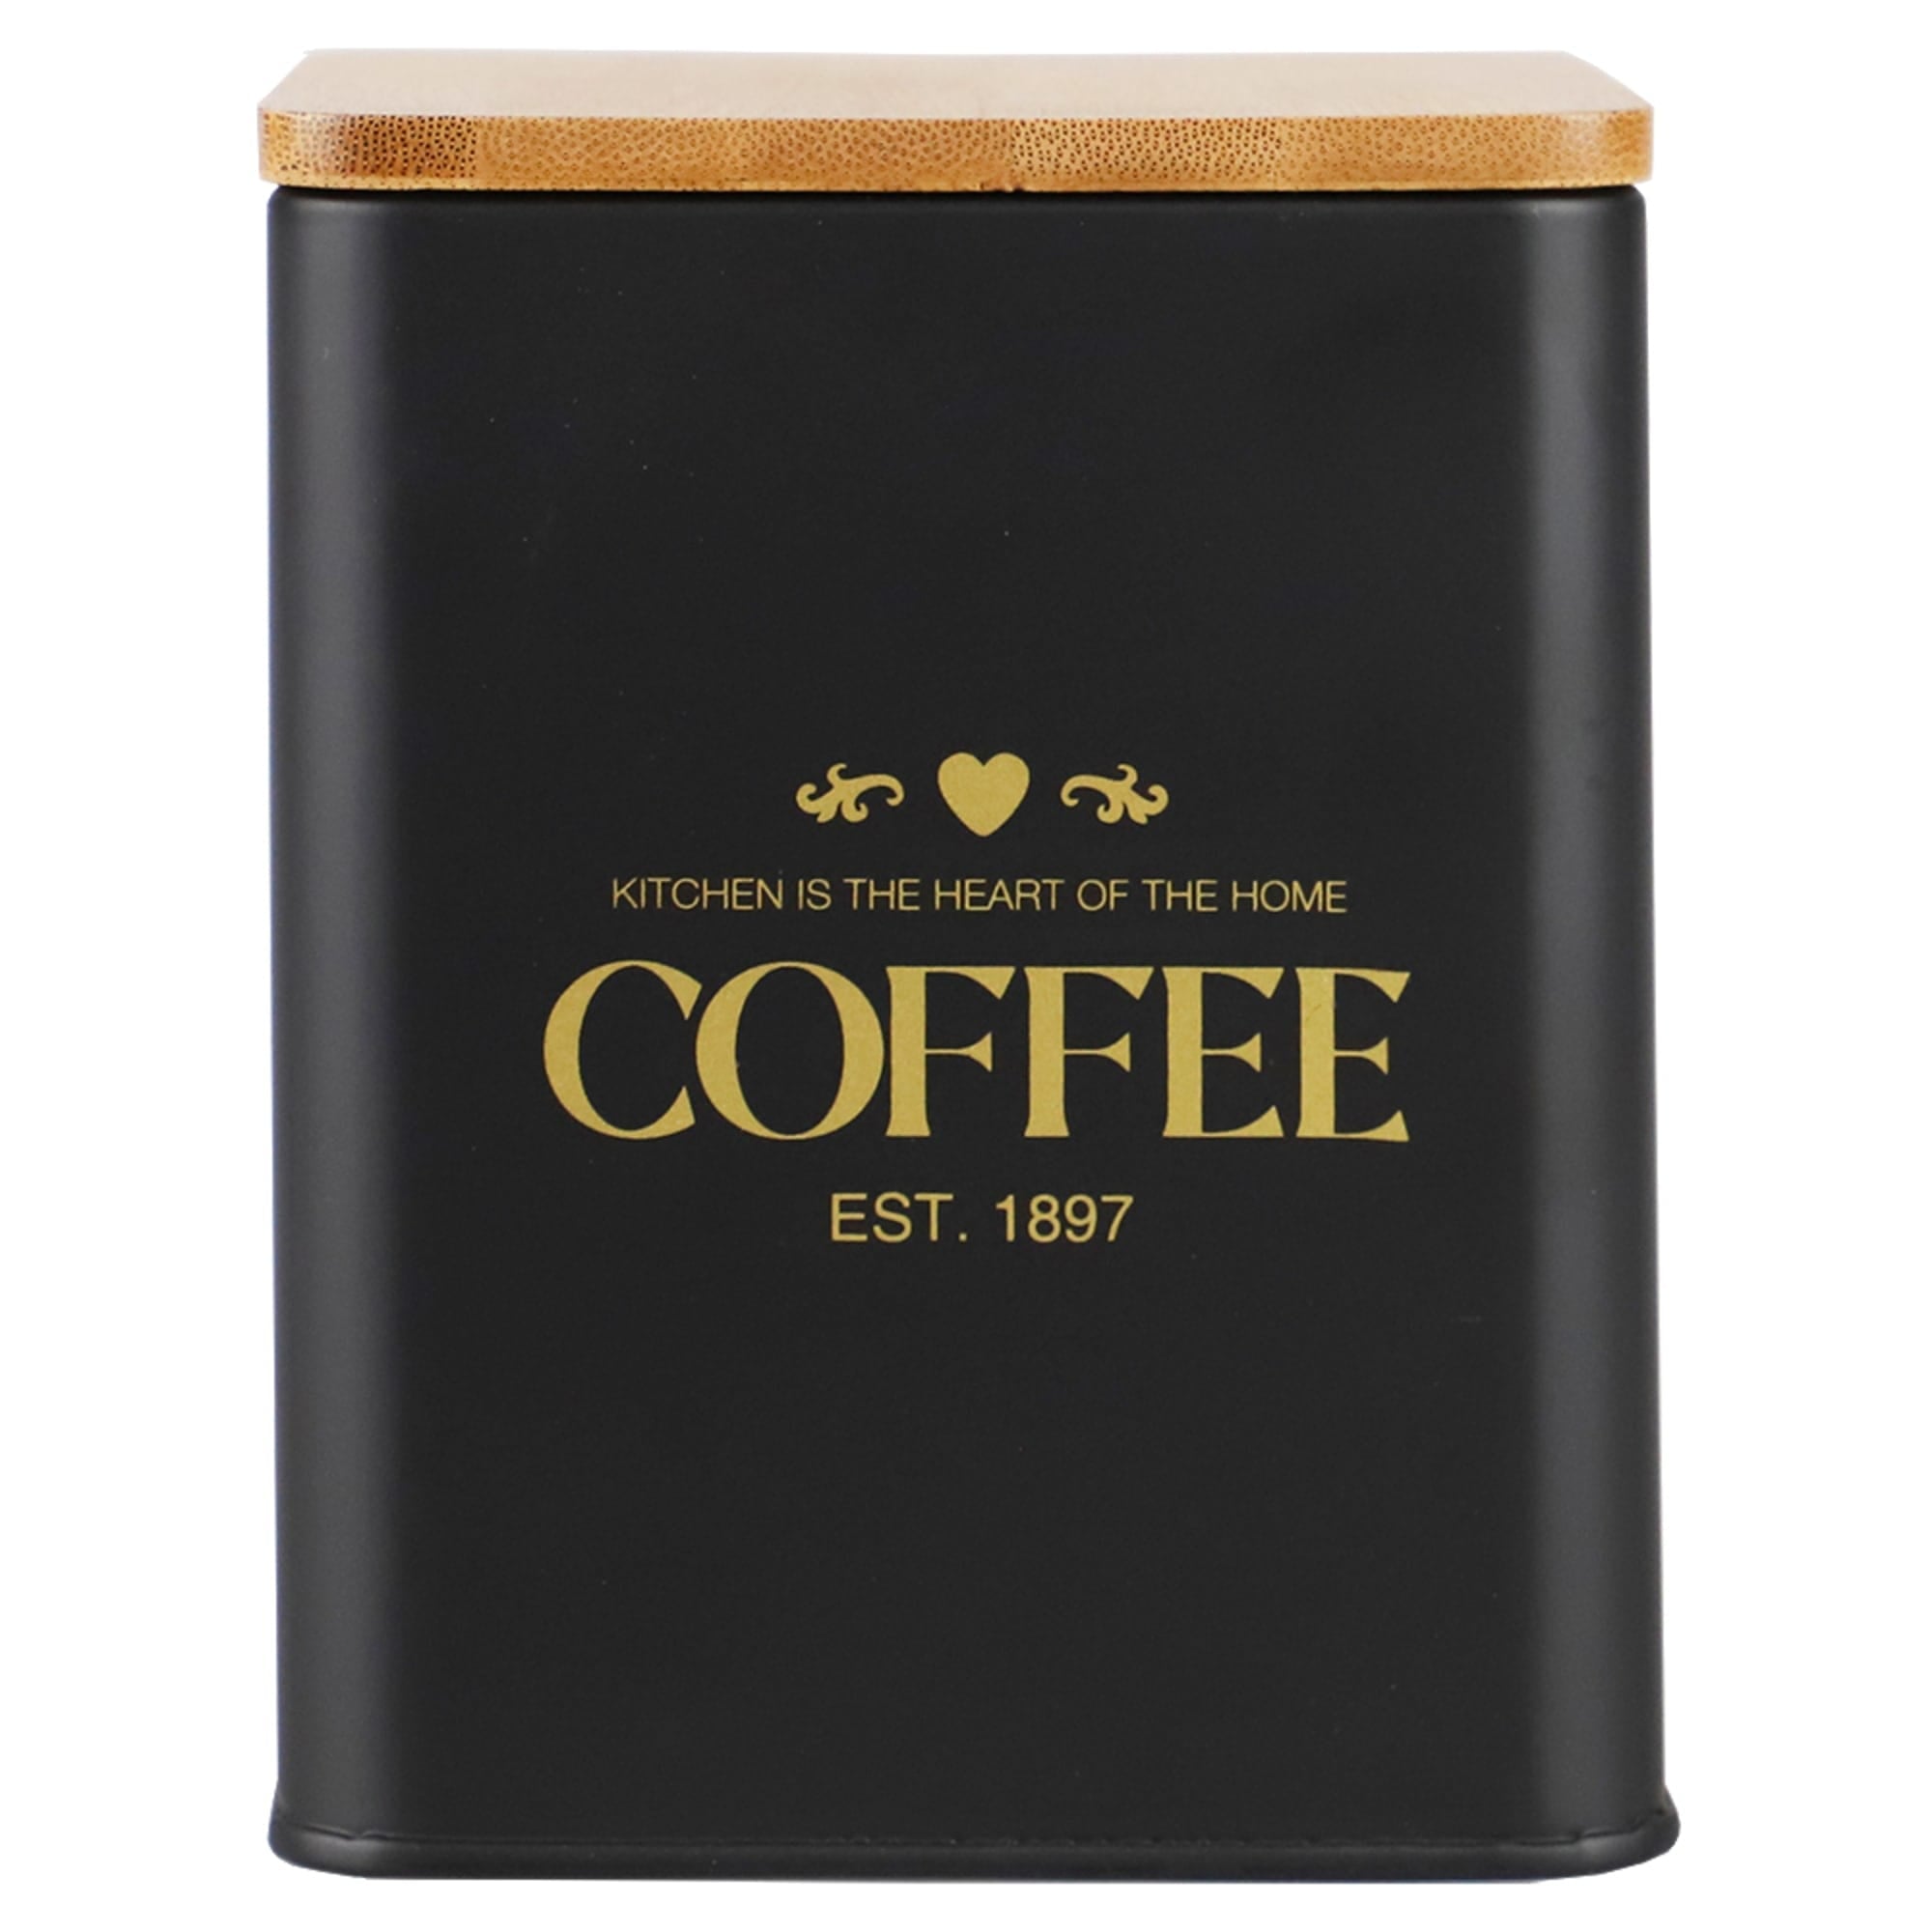 Home Basics Bistro 50 oz. Tin Coffee Canister with Bamboo Top, Black $6.00 EACH, CASE PACK OF 12